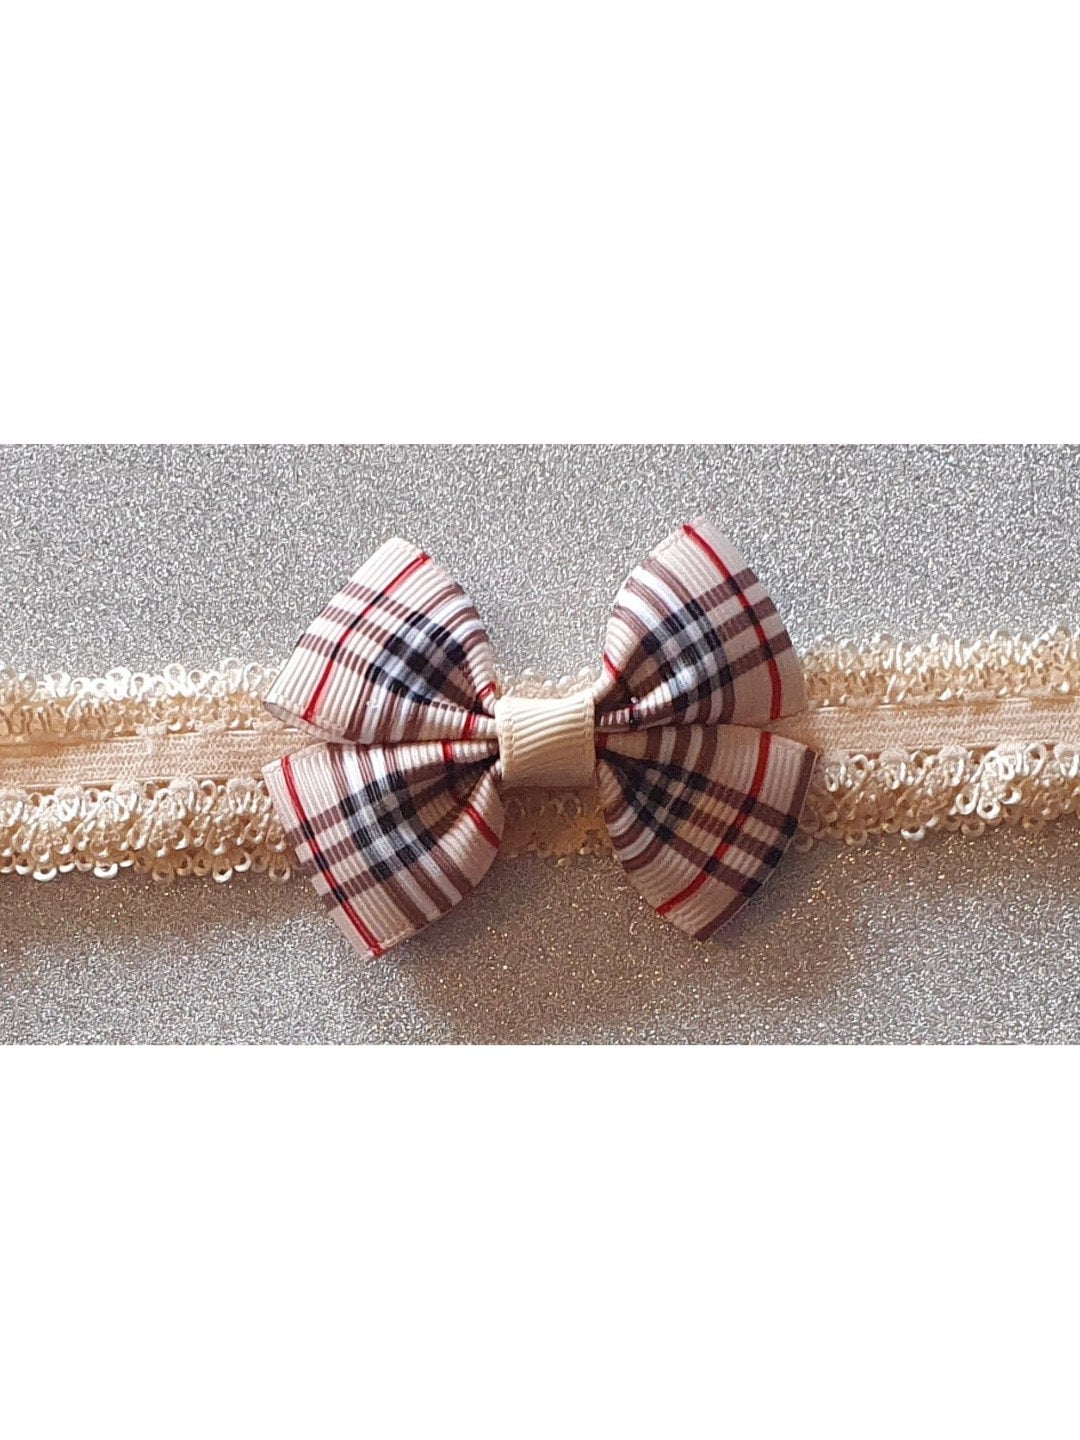 Wonderland Creations - Louis Vuitton Mini Hairbow Or Headband 💗 Design 75  Chloe Bow 2 💯Handmade Price From £1.30 Available as Alligatorclip,  Snapclip, Mini Soft Bobble, Thin Bobble, Thick Bobble Headbands Elastic